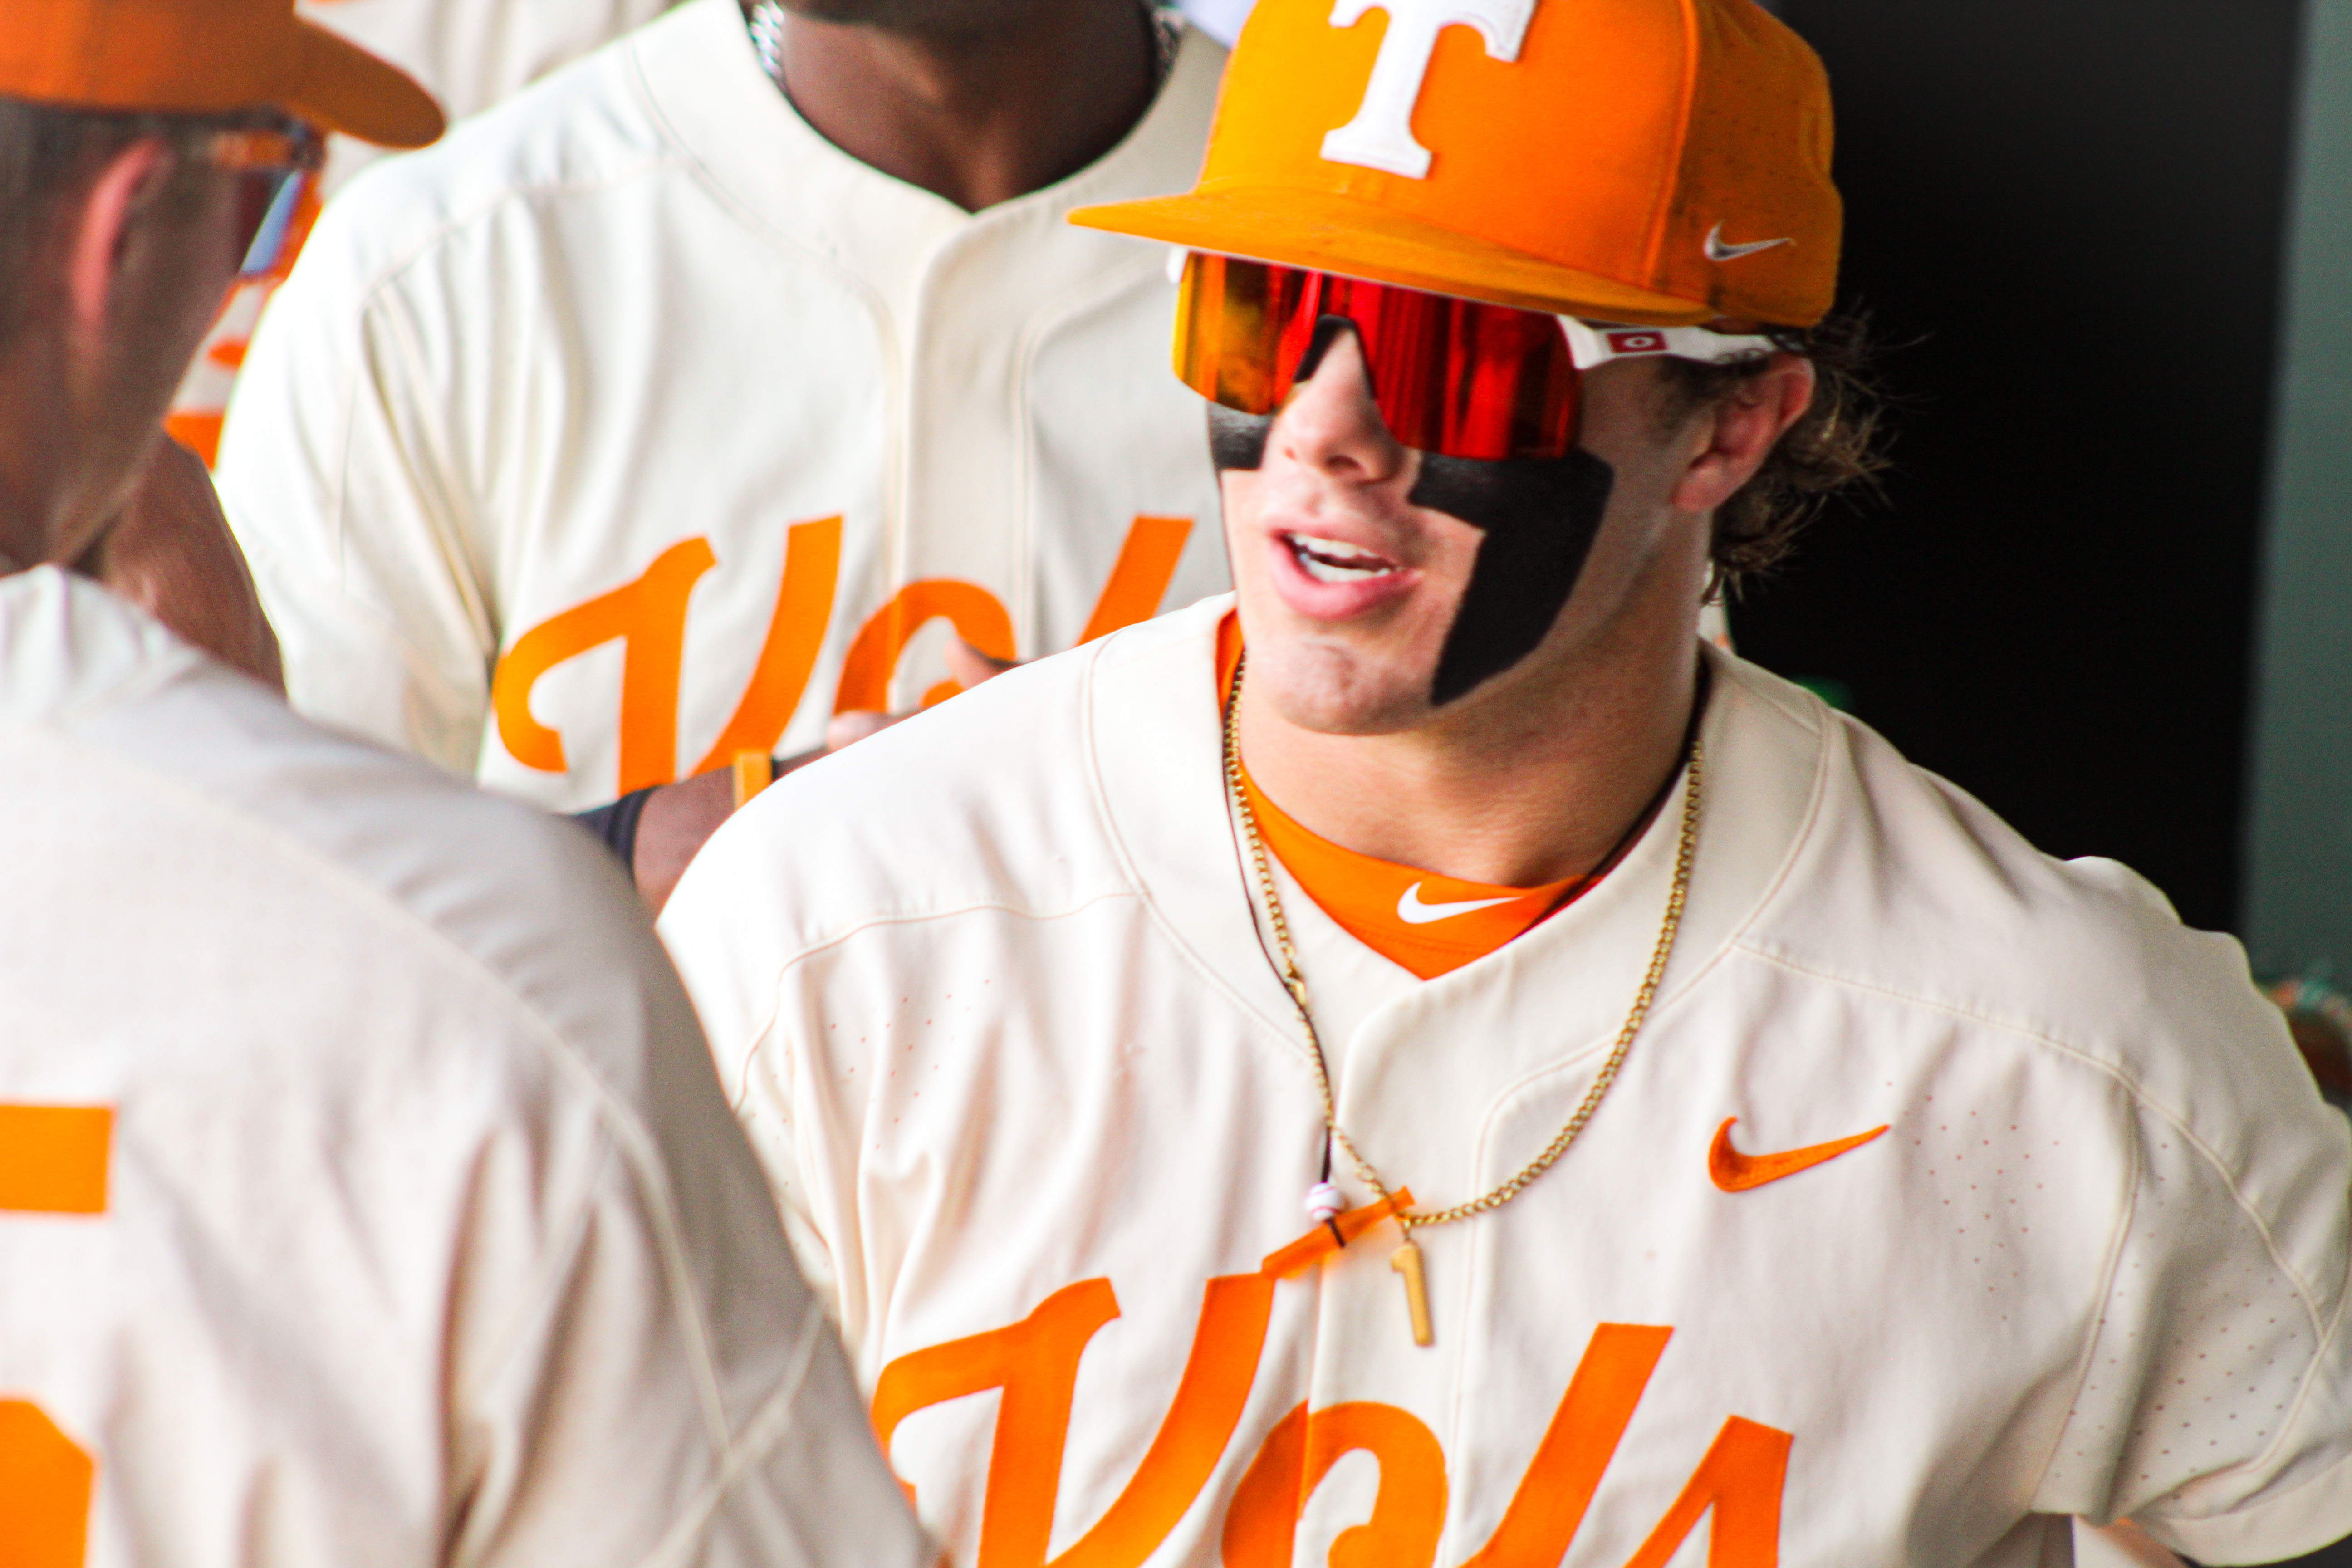 Looking at Where Tennessee Baseball Vols Are Landing in Latest